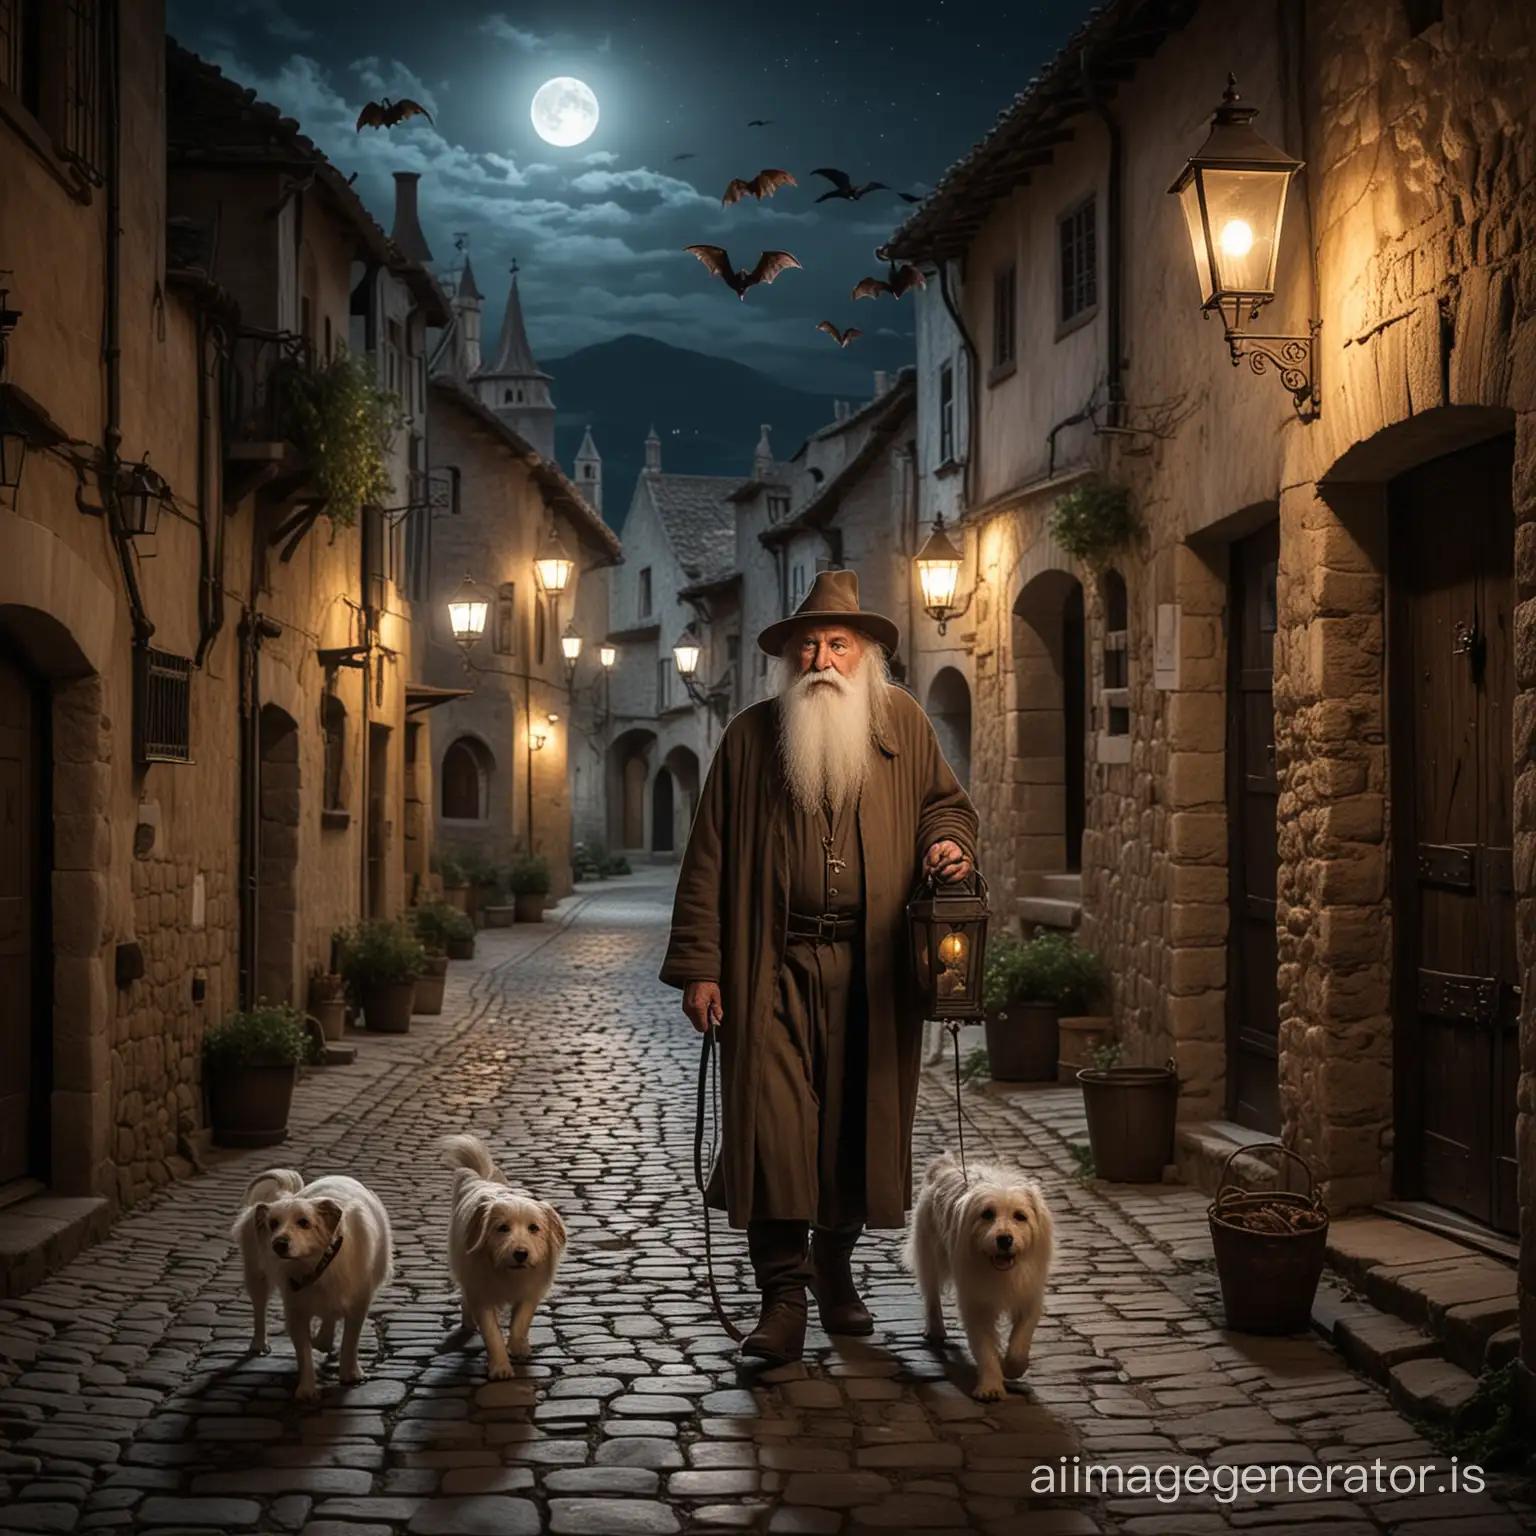 an old man with a long white beard, wearing a hat, walking in a street of a medieval village at night, holding an old lamp; 2 bats flying above his head and a dog running beside him.